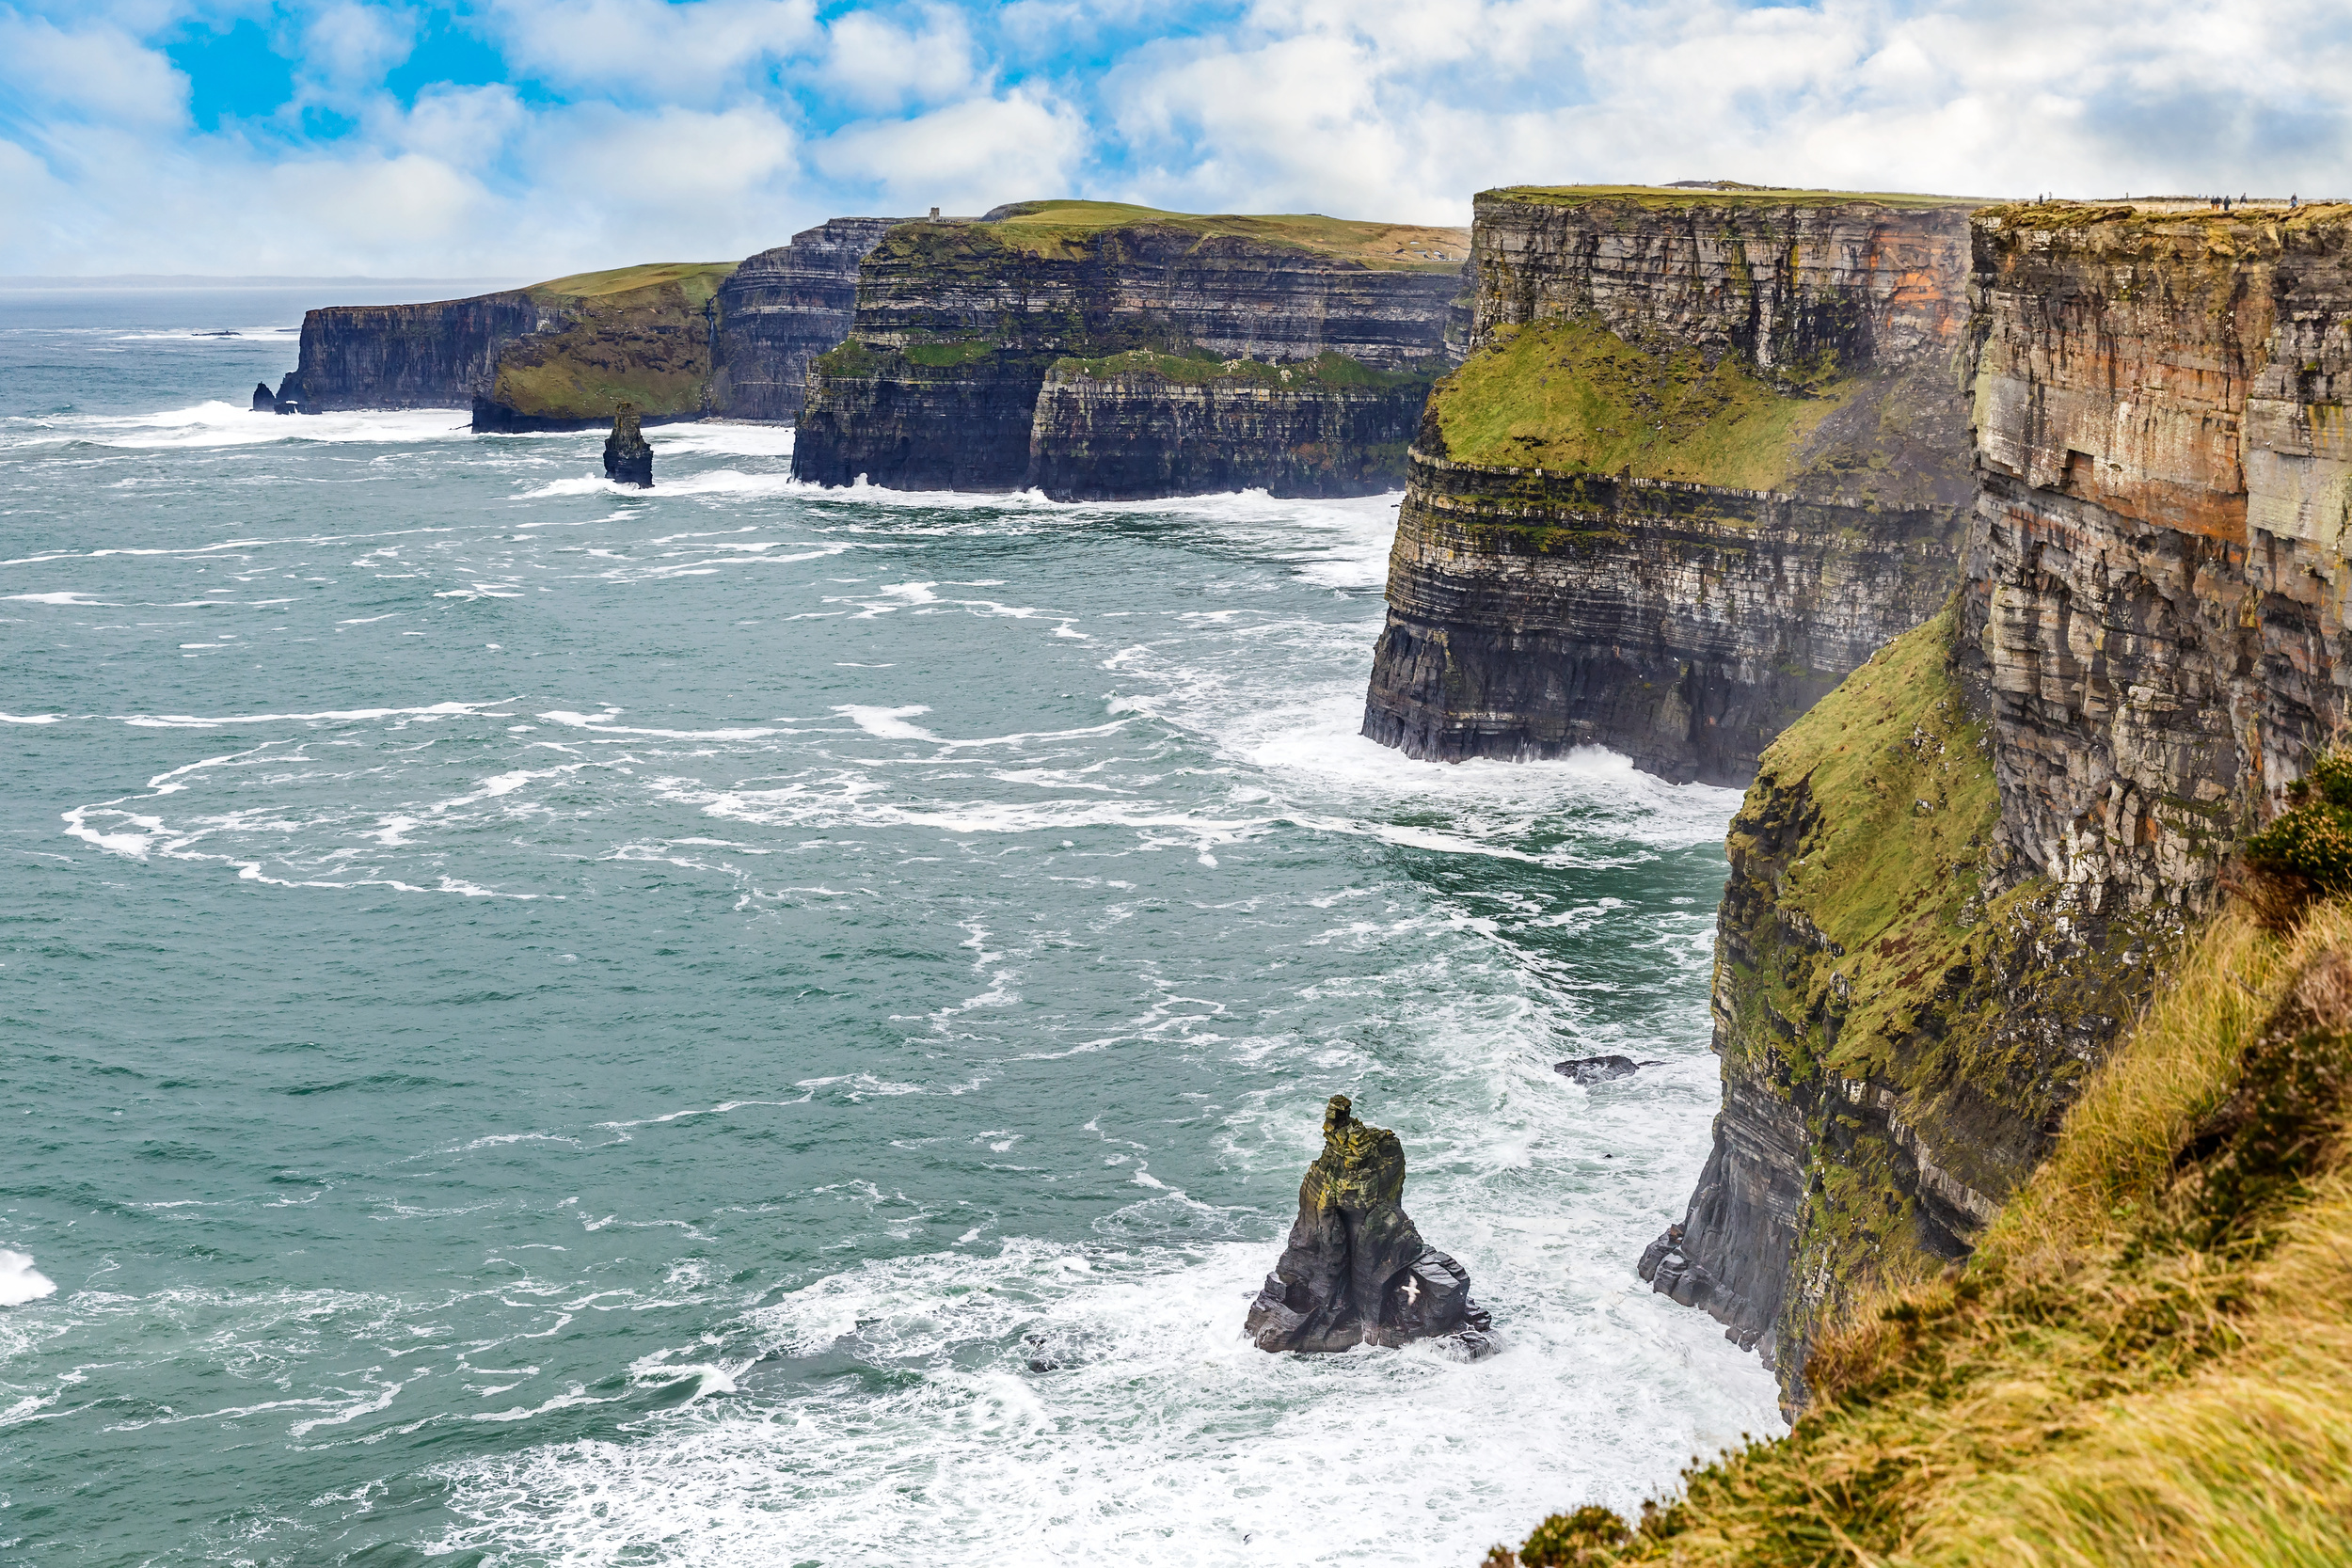 <p>Admittedly a bit far as a day trip from Dublin, but if you can swing it, you won’t regret the decision. The straight-down bright green cliffs are a great viewpoint for Galway Bay and the Aran Islands. You’ll get plenty of exercise on the walk to make the long drive worth it!</p><p>You may also like: <a href='https://www.yardbarker.com/lifestyle/articles/the_20_best_places_to_visit_in_croatia_that_arent_dubrovnik_021224/s1__38816399'>The 20 best places to visit in Croatia that aren’t Dubrovnik</a></p>